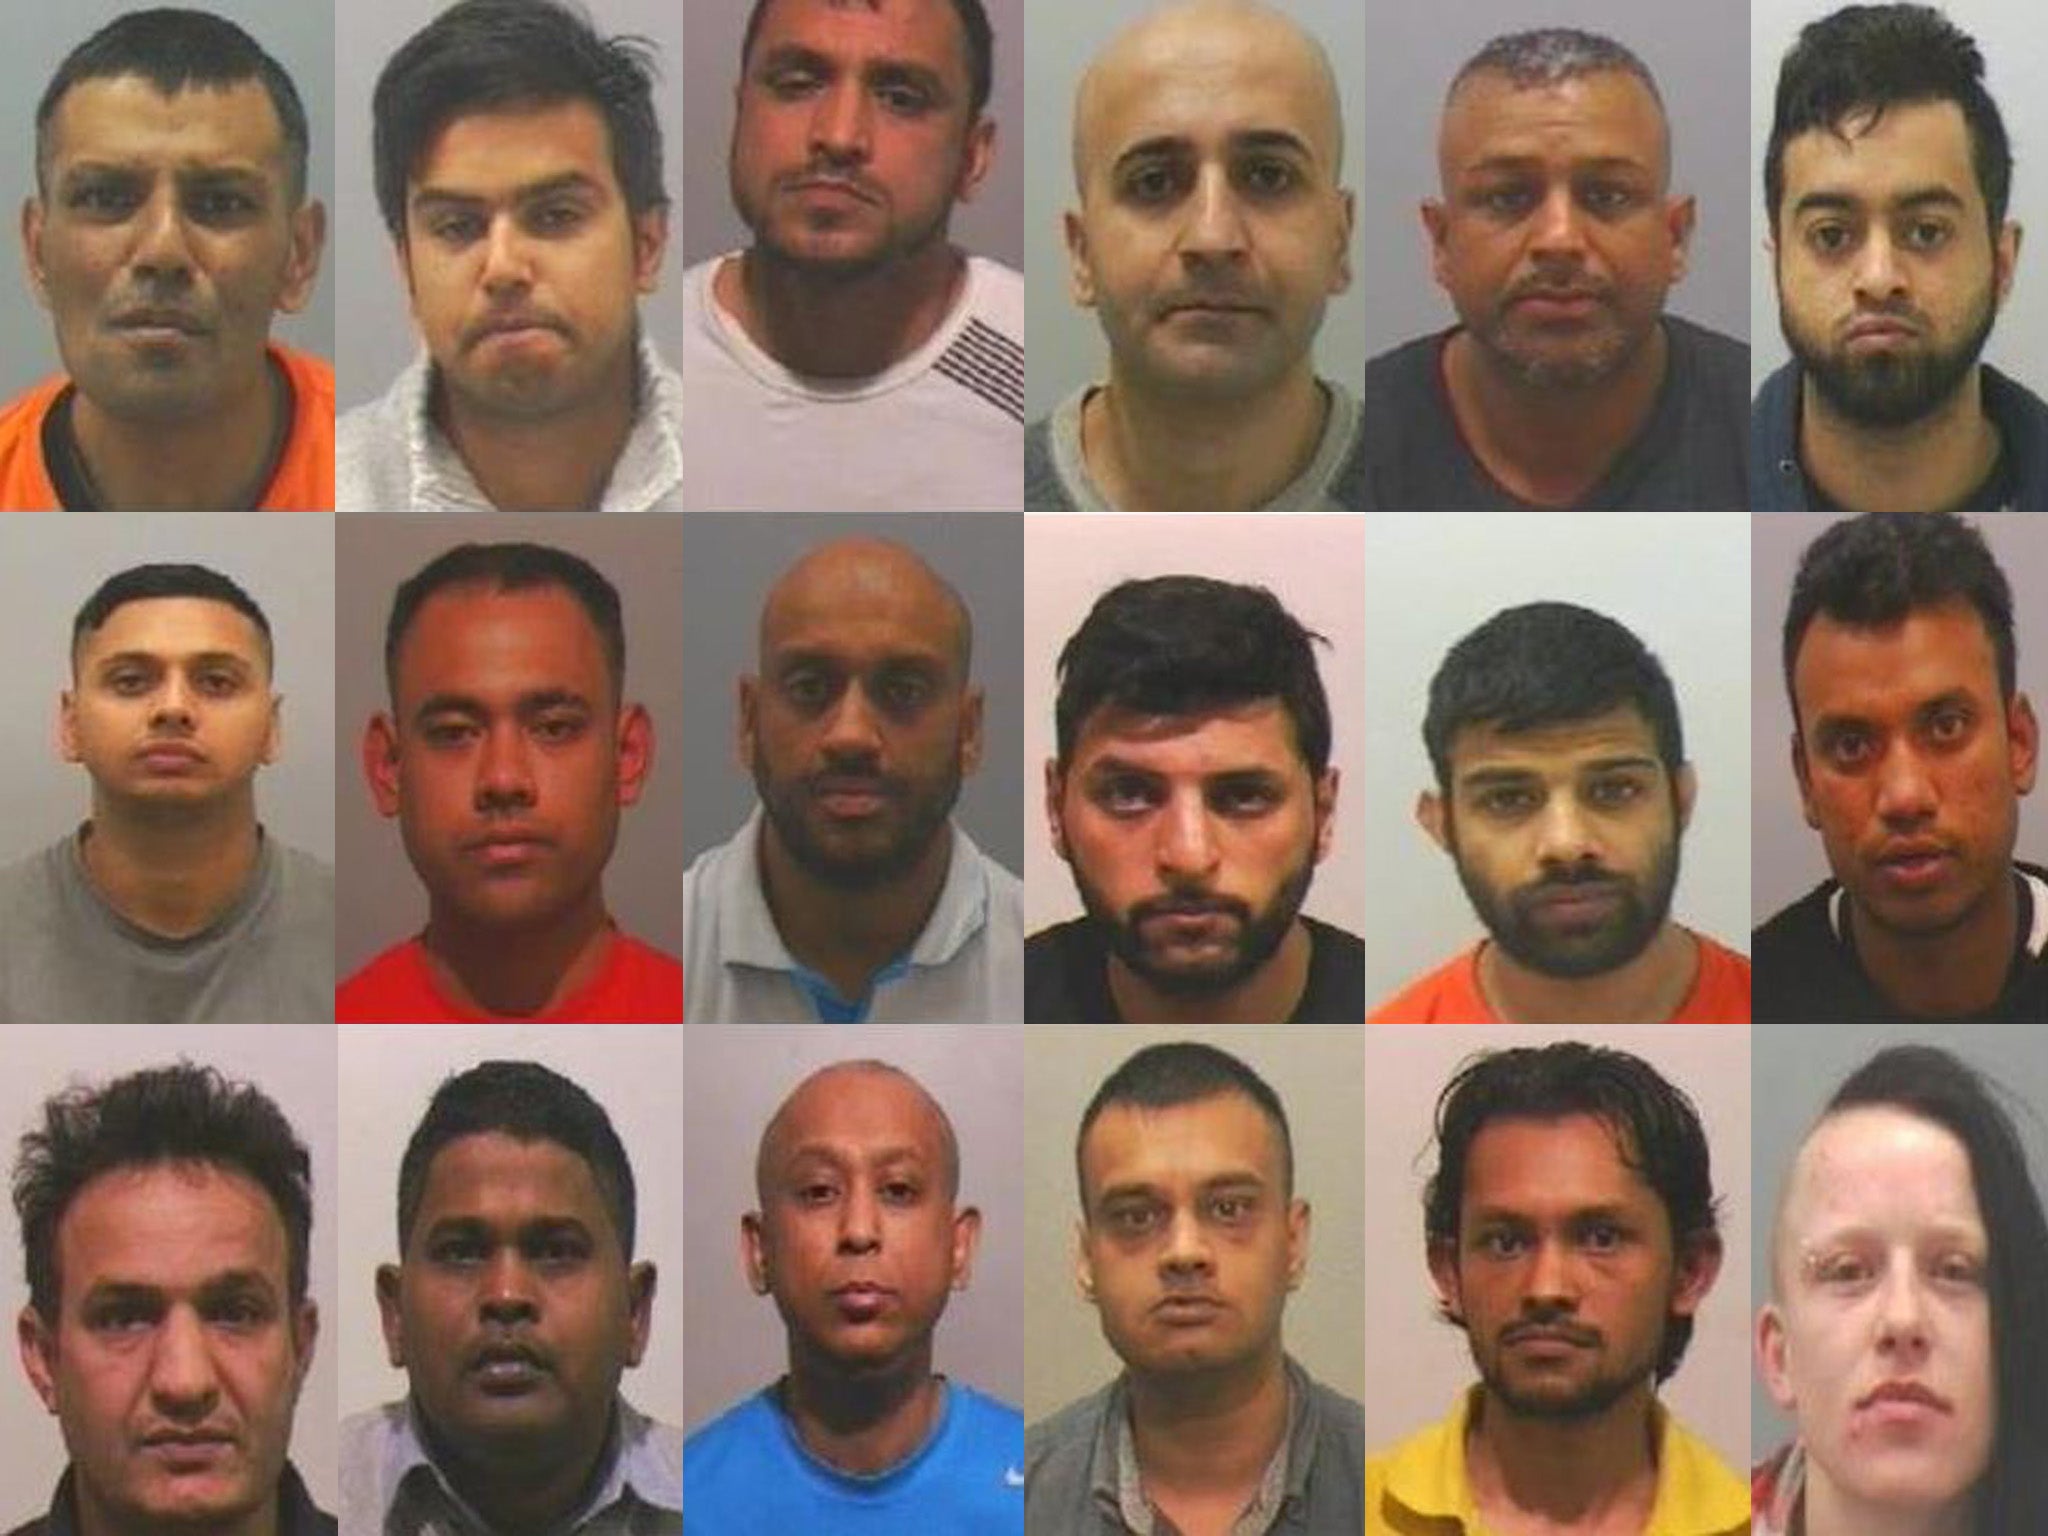 The conviction of 17 men and one woman in Newcastle in August restarted the national debate on grooming